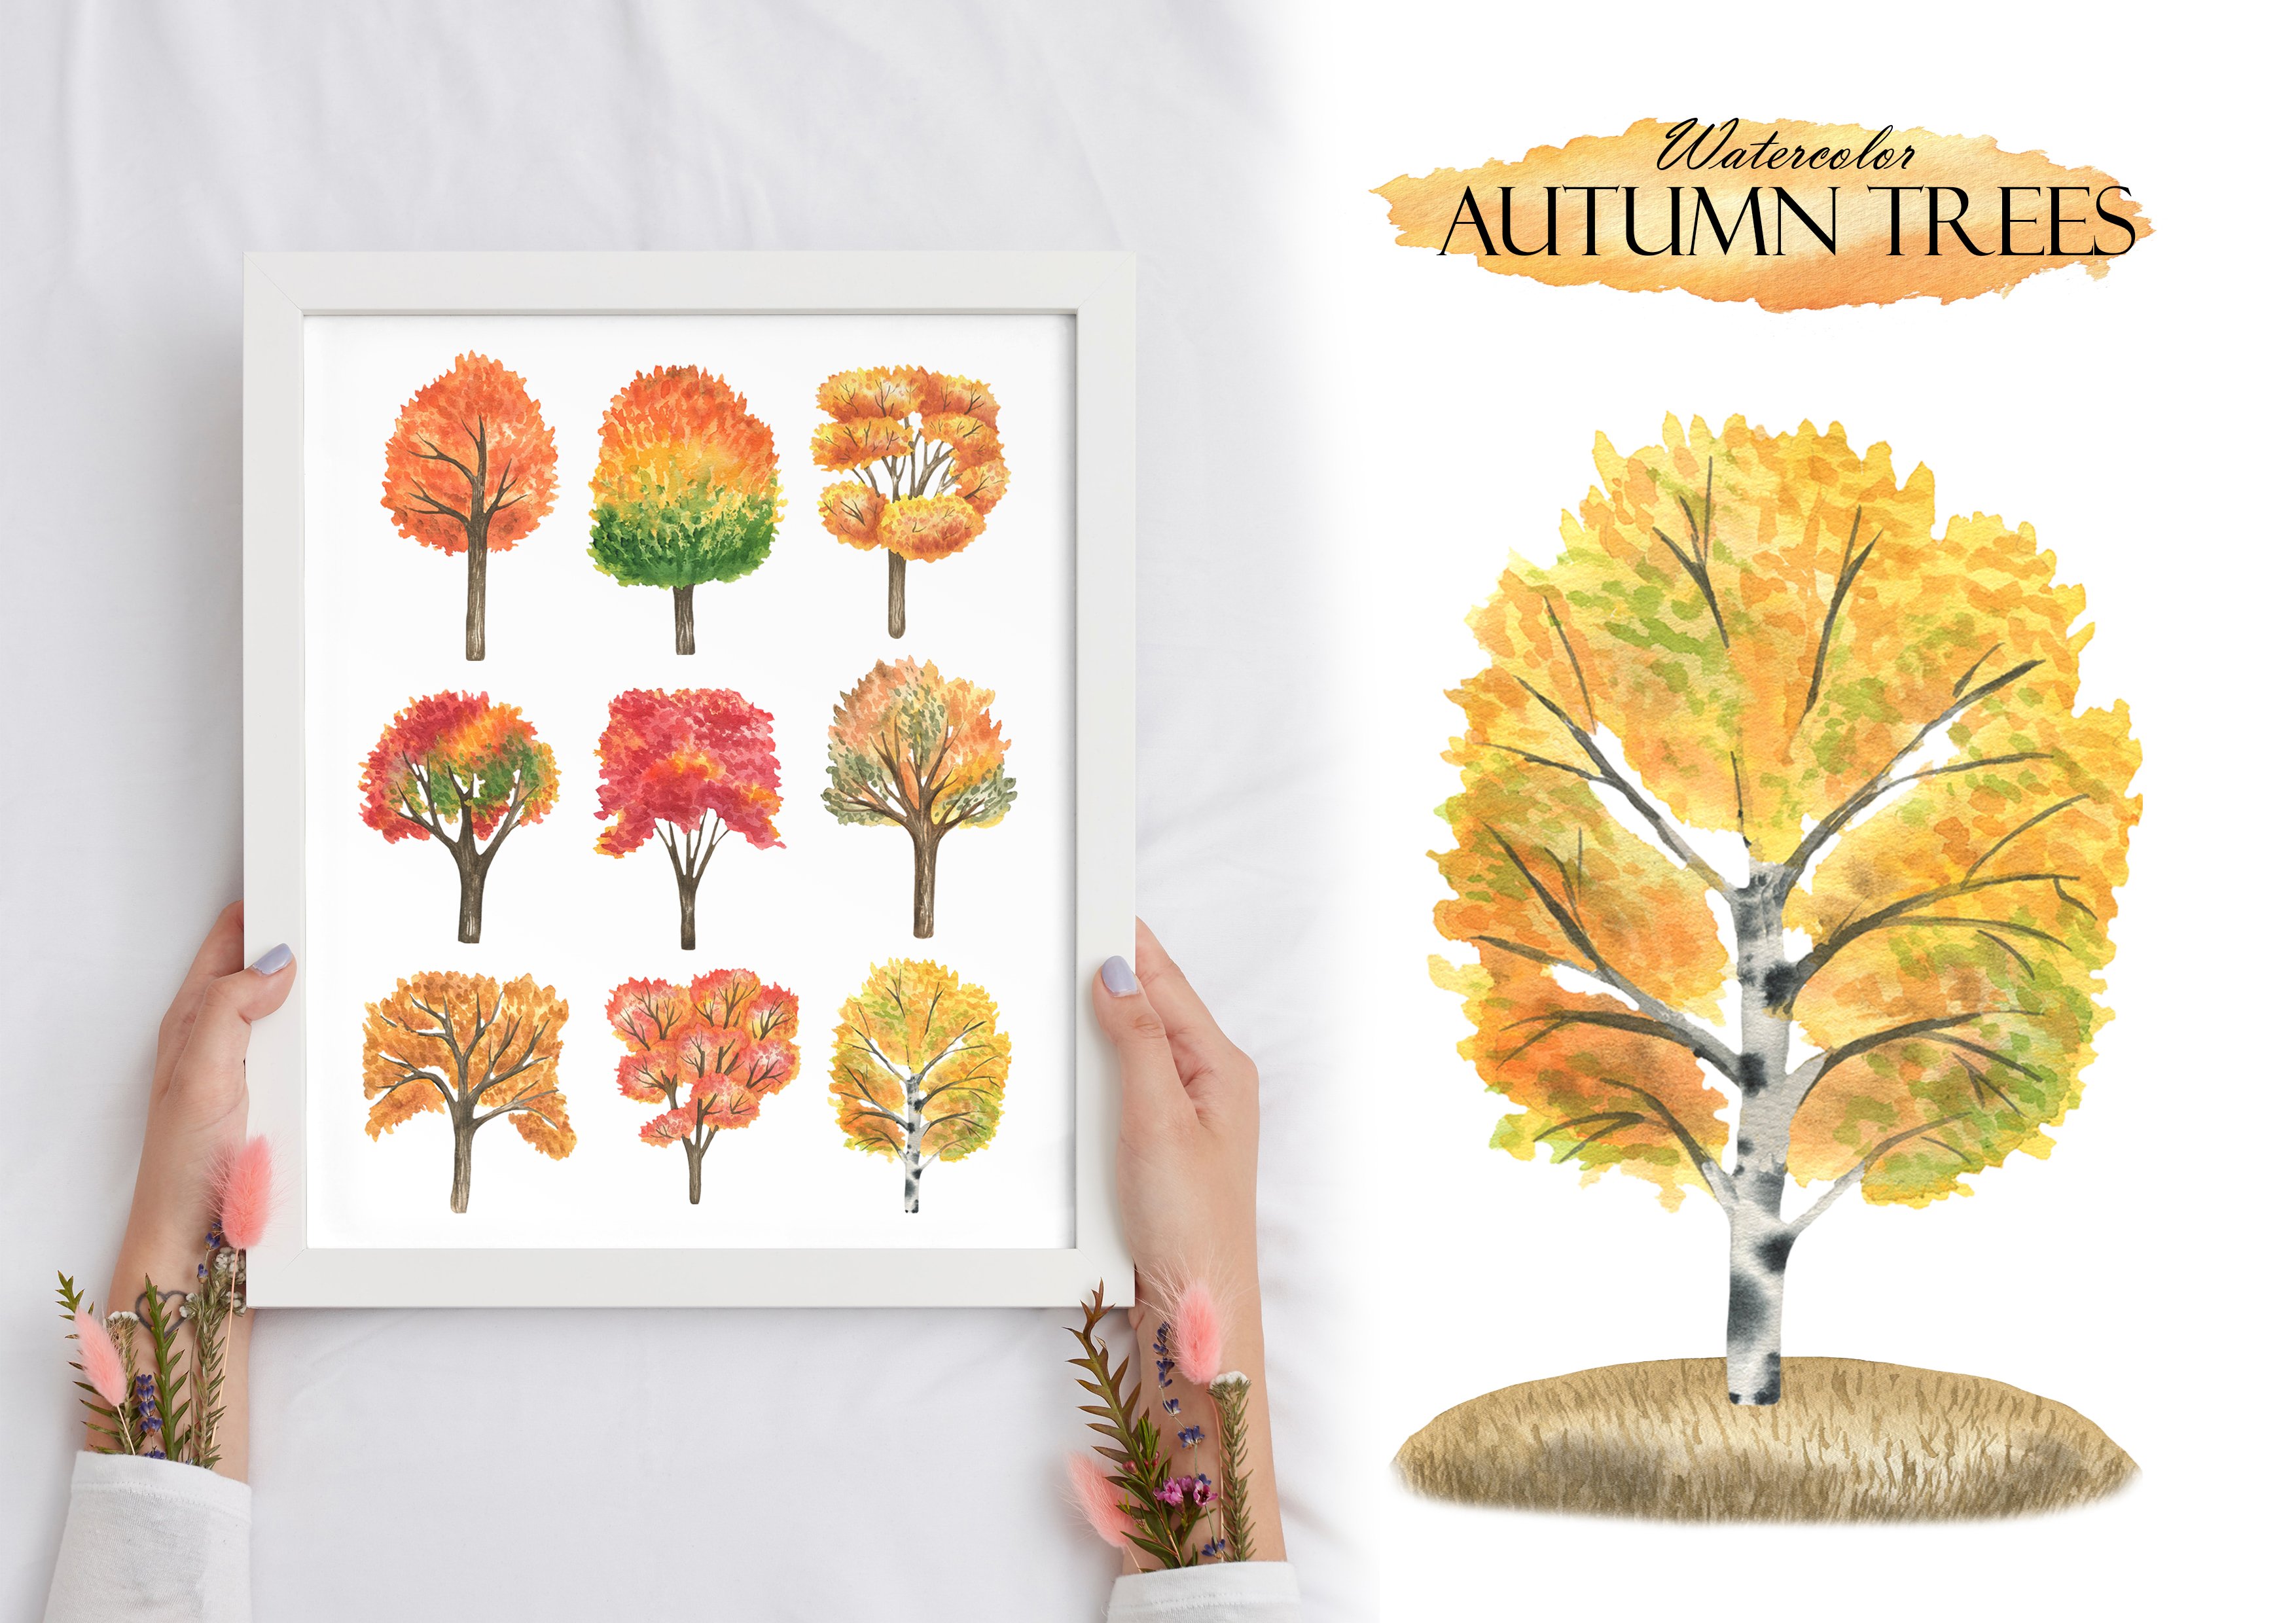 Woman holding a framed picture of autumn trees.